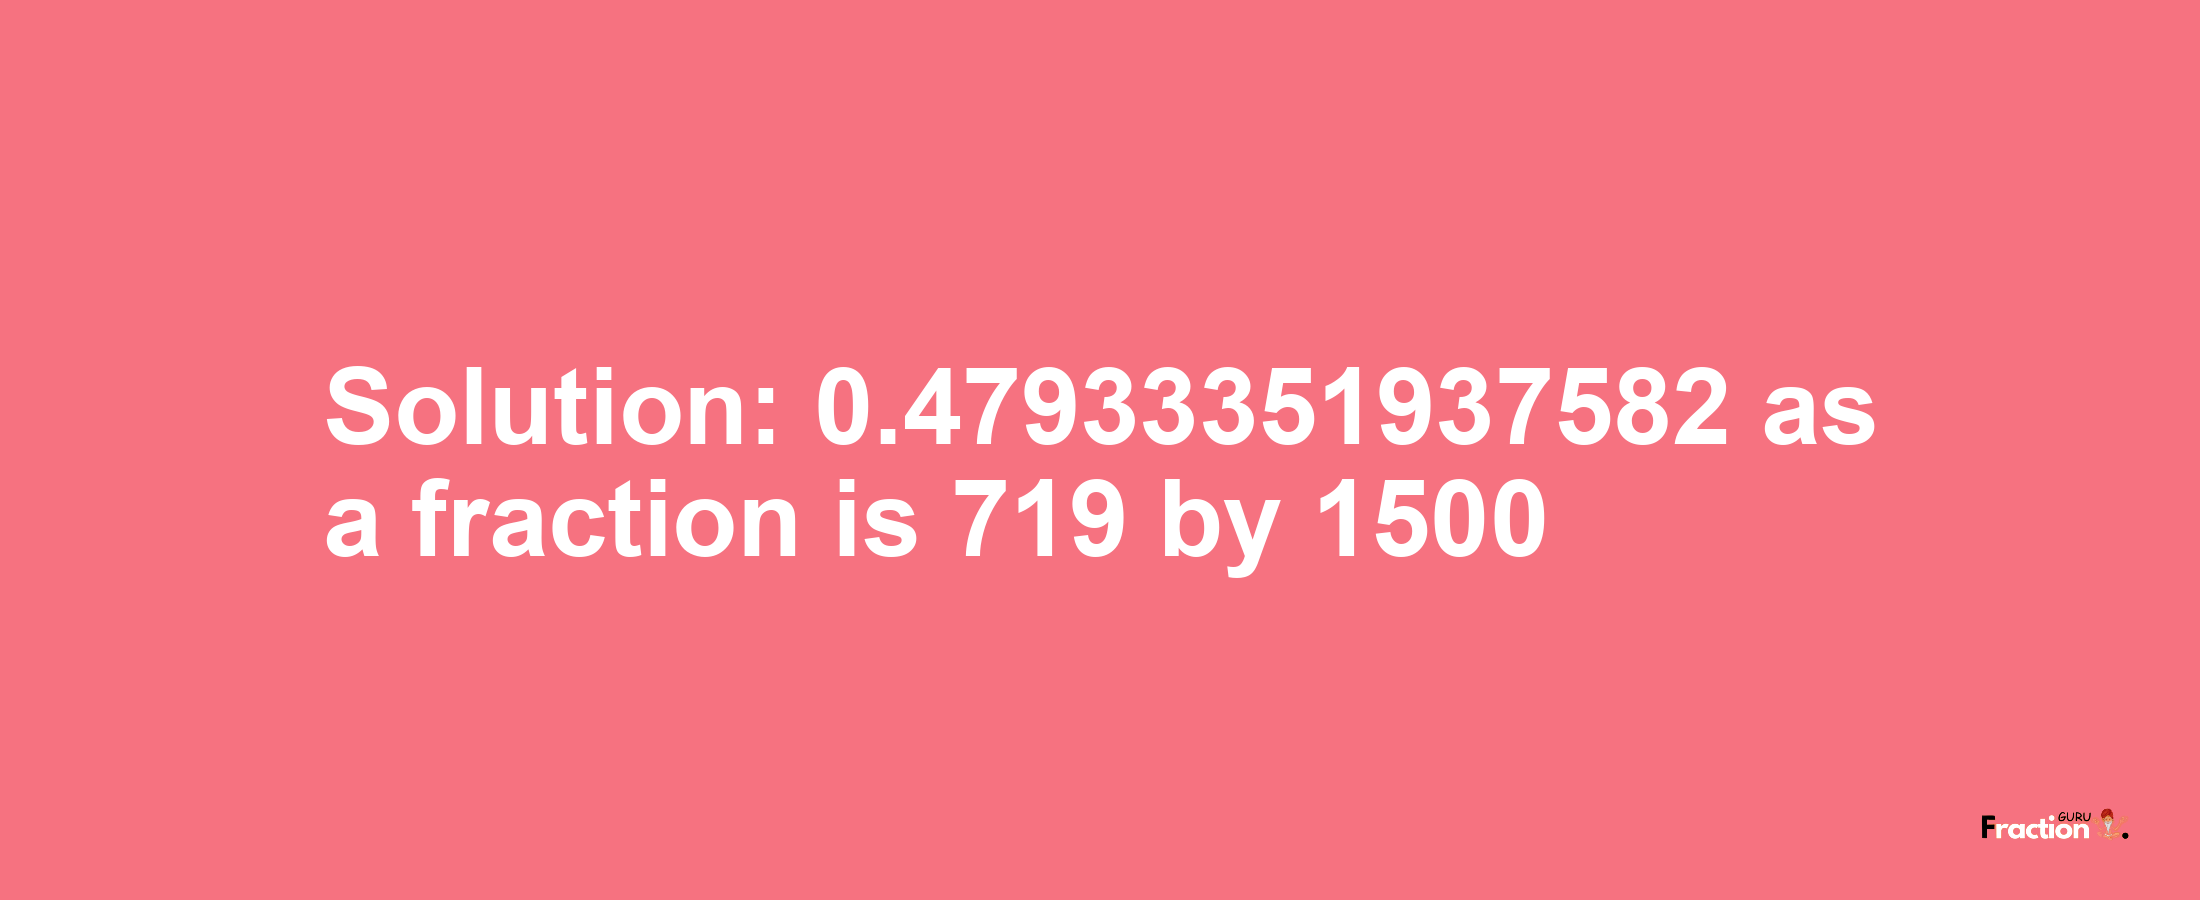 Solution:0.47933351937582 as a fraction is 719/1500